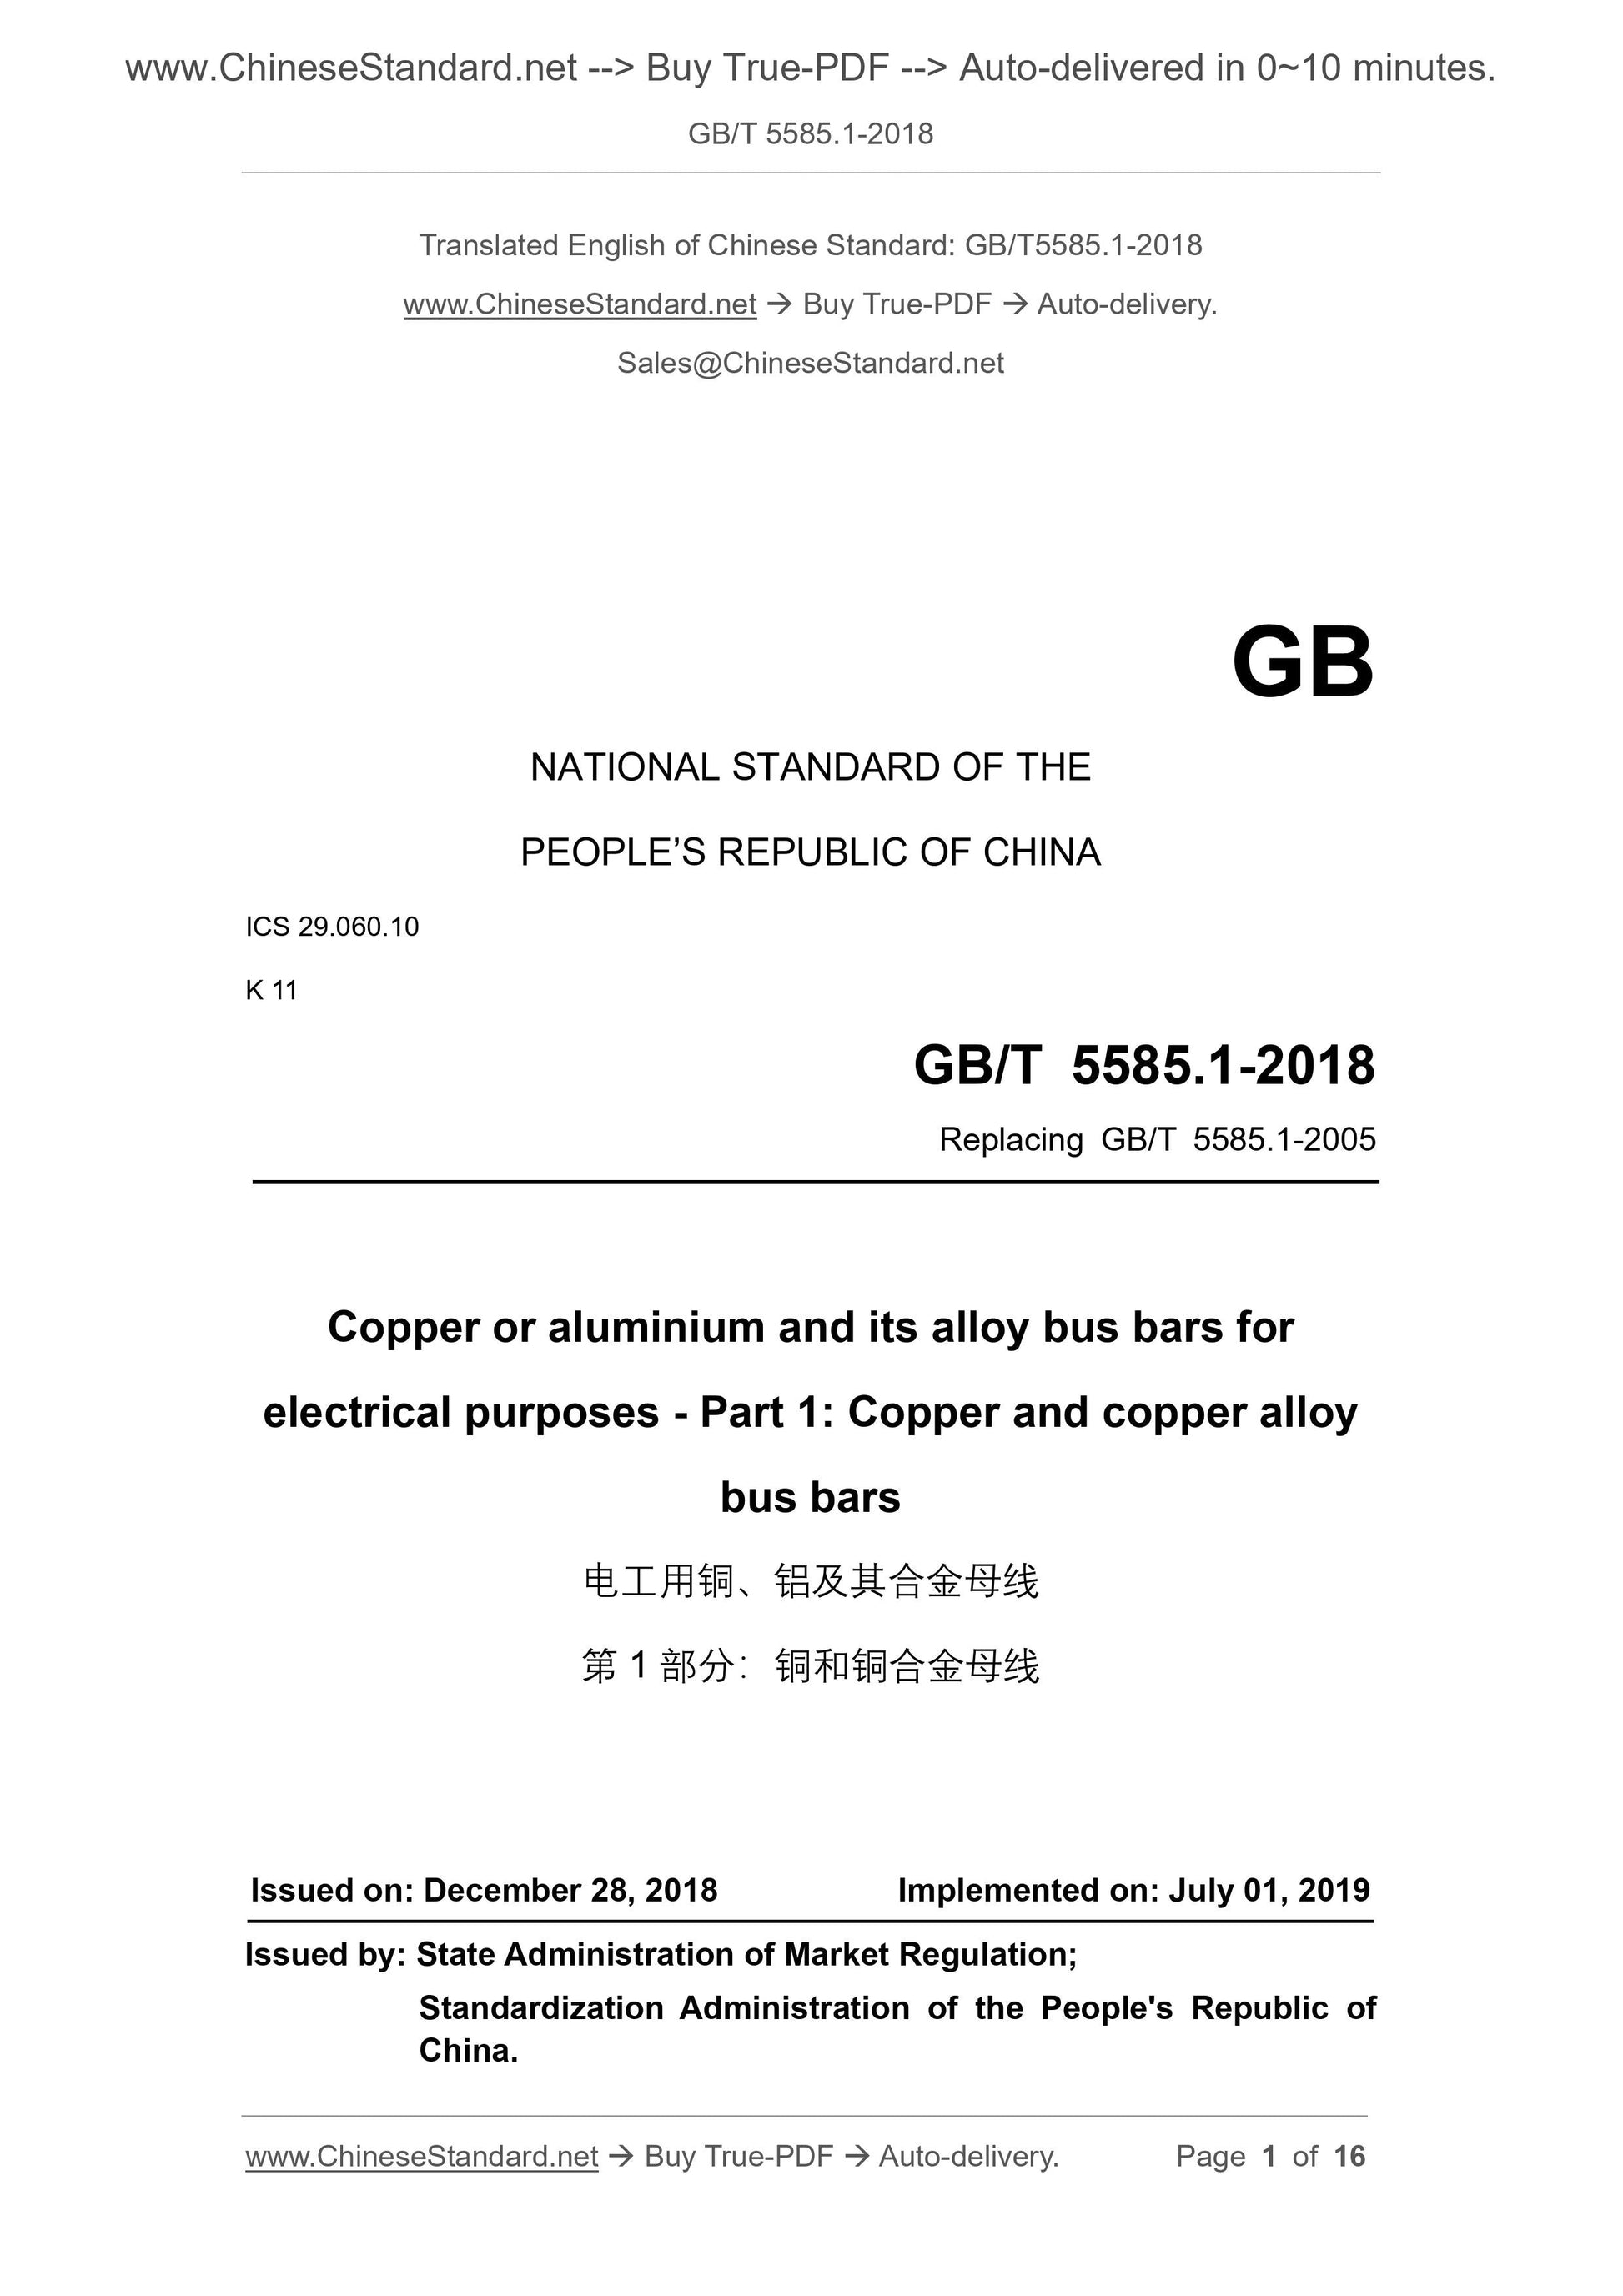 GB/T 5585.1-2018 Page 1